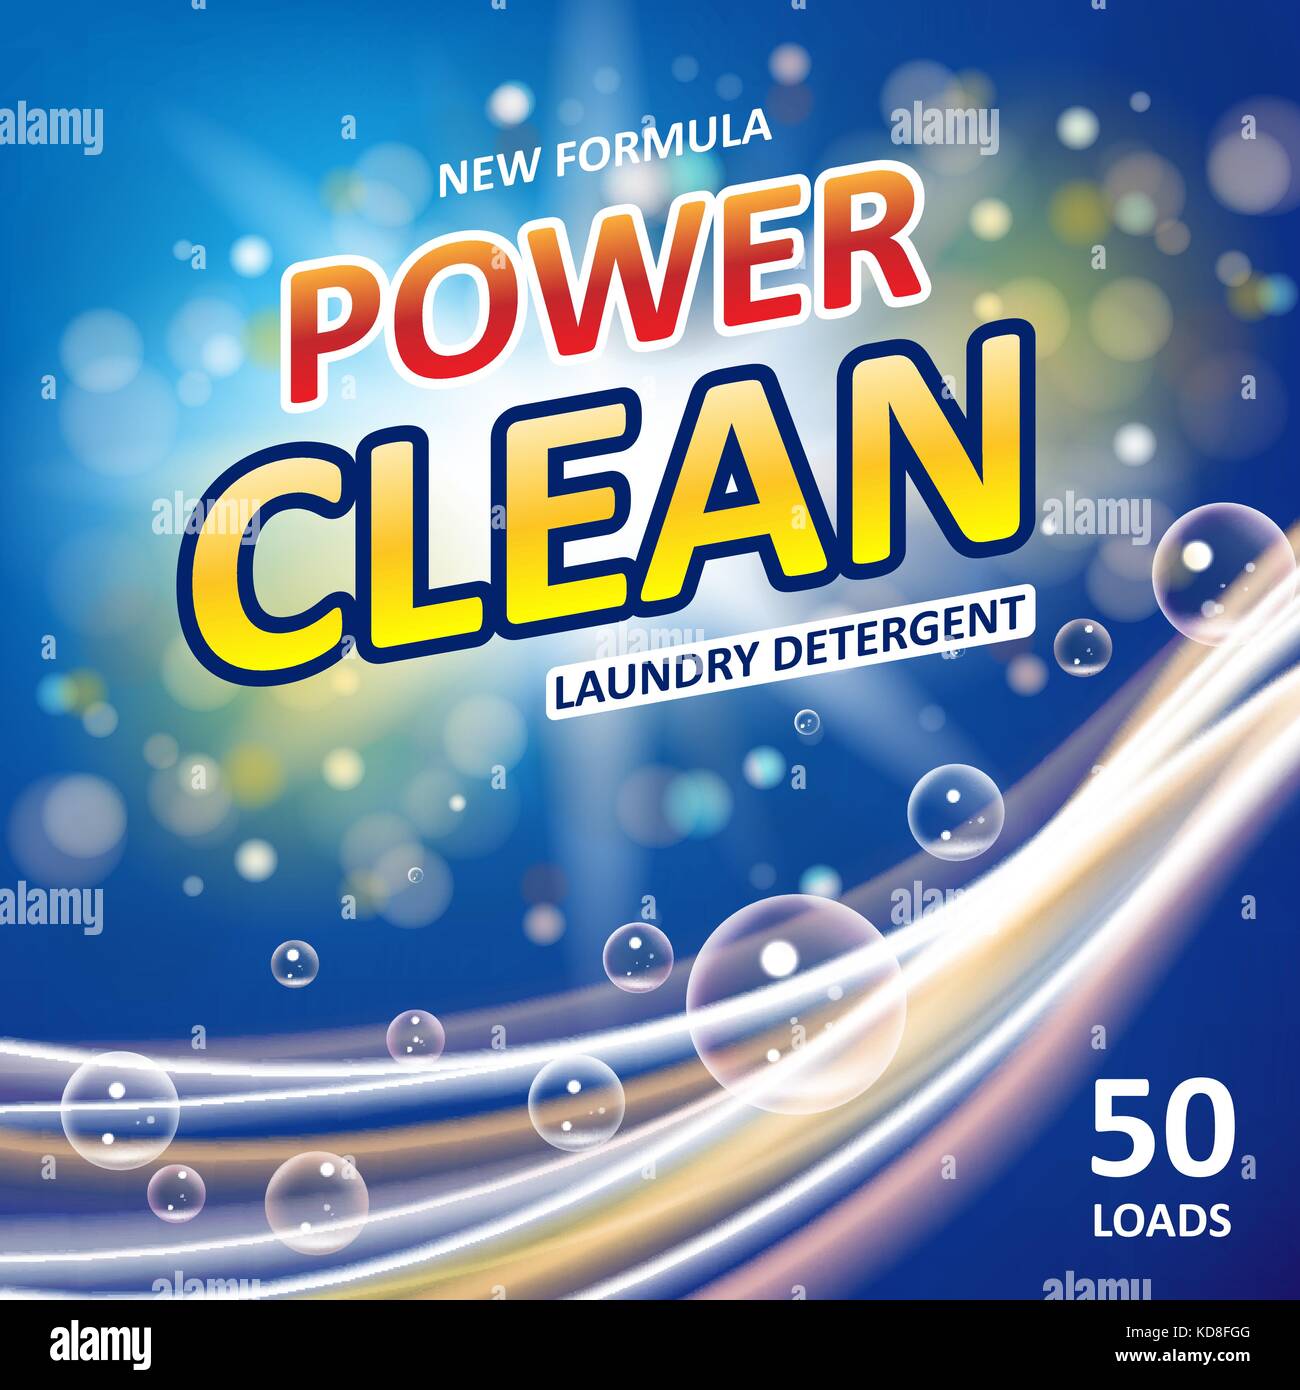 Power clean soap banner ads design. Laundry detergent colorful Template. Washing Powder or Liquid Detergents Package design. Vector illustration Stock Vector